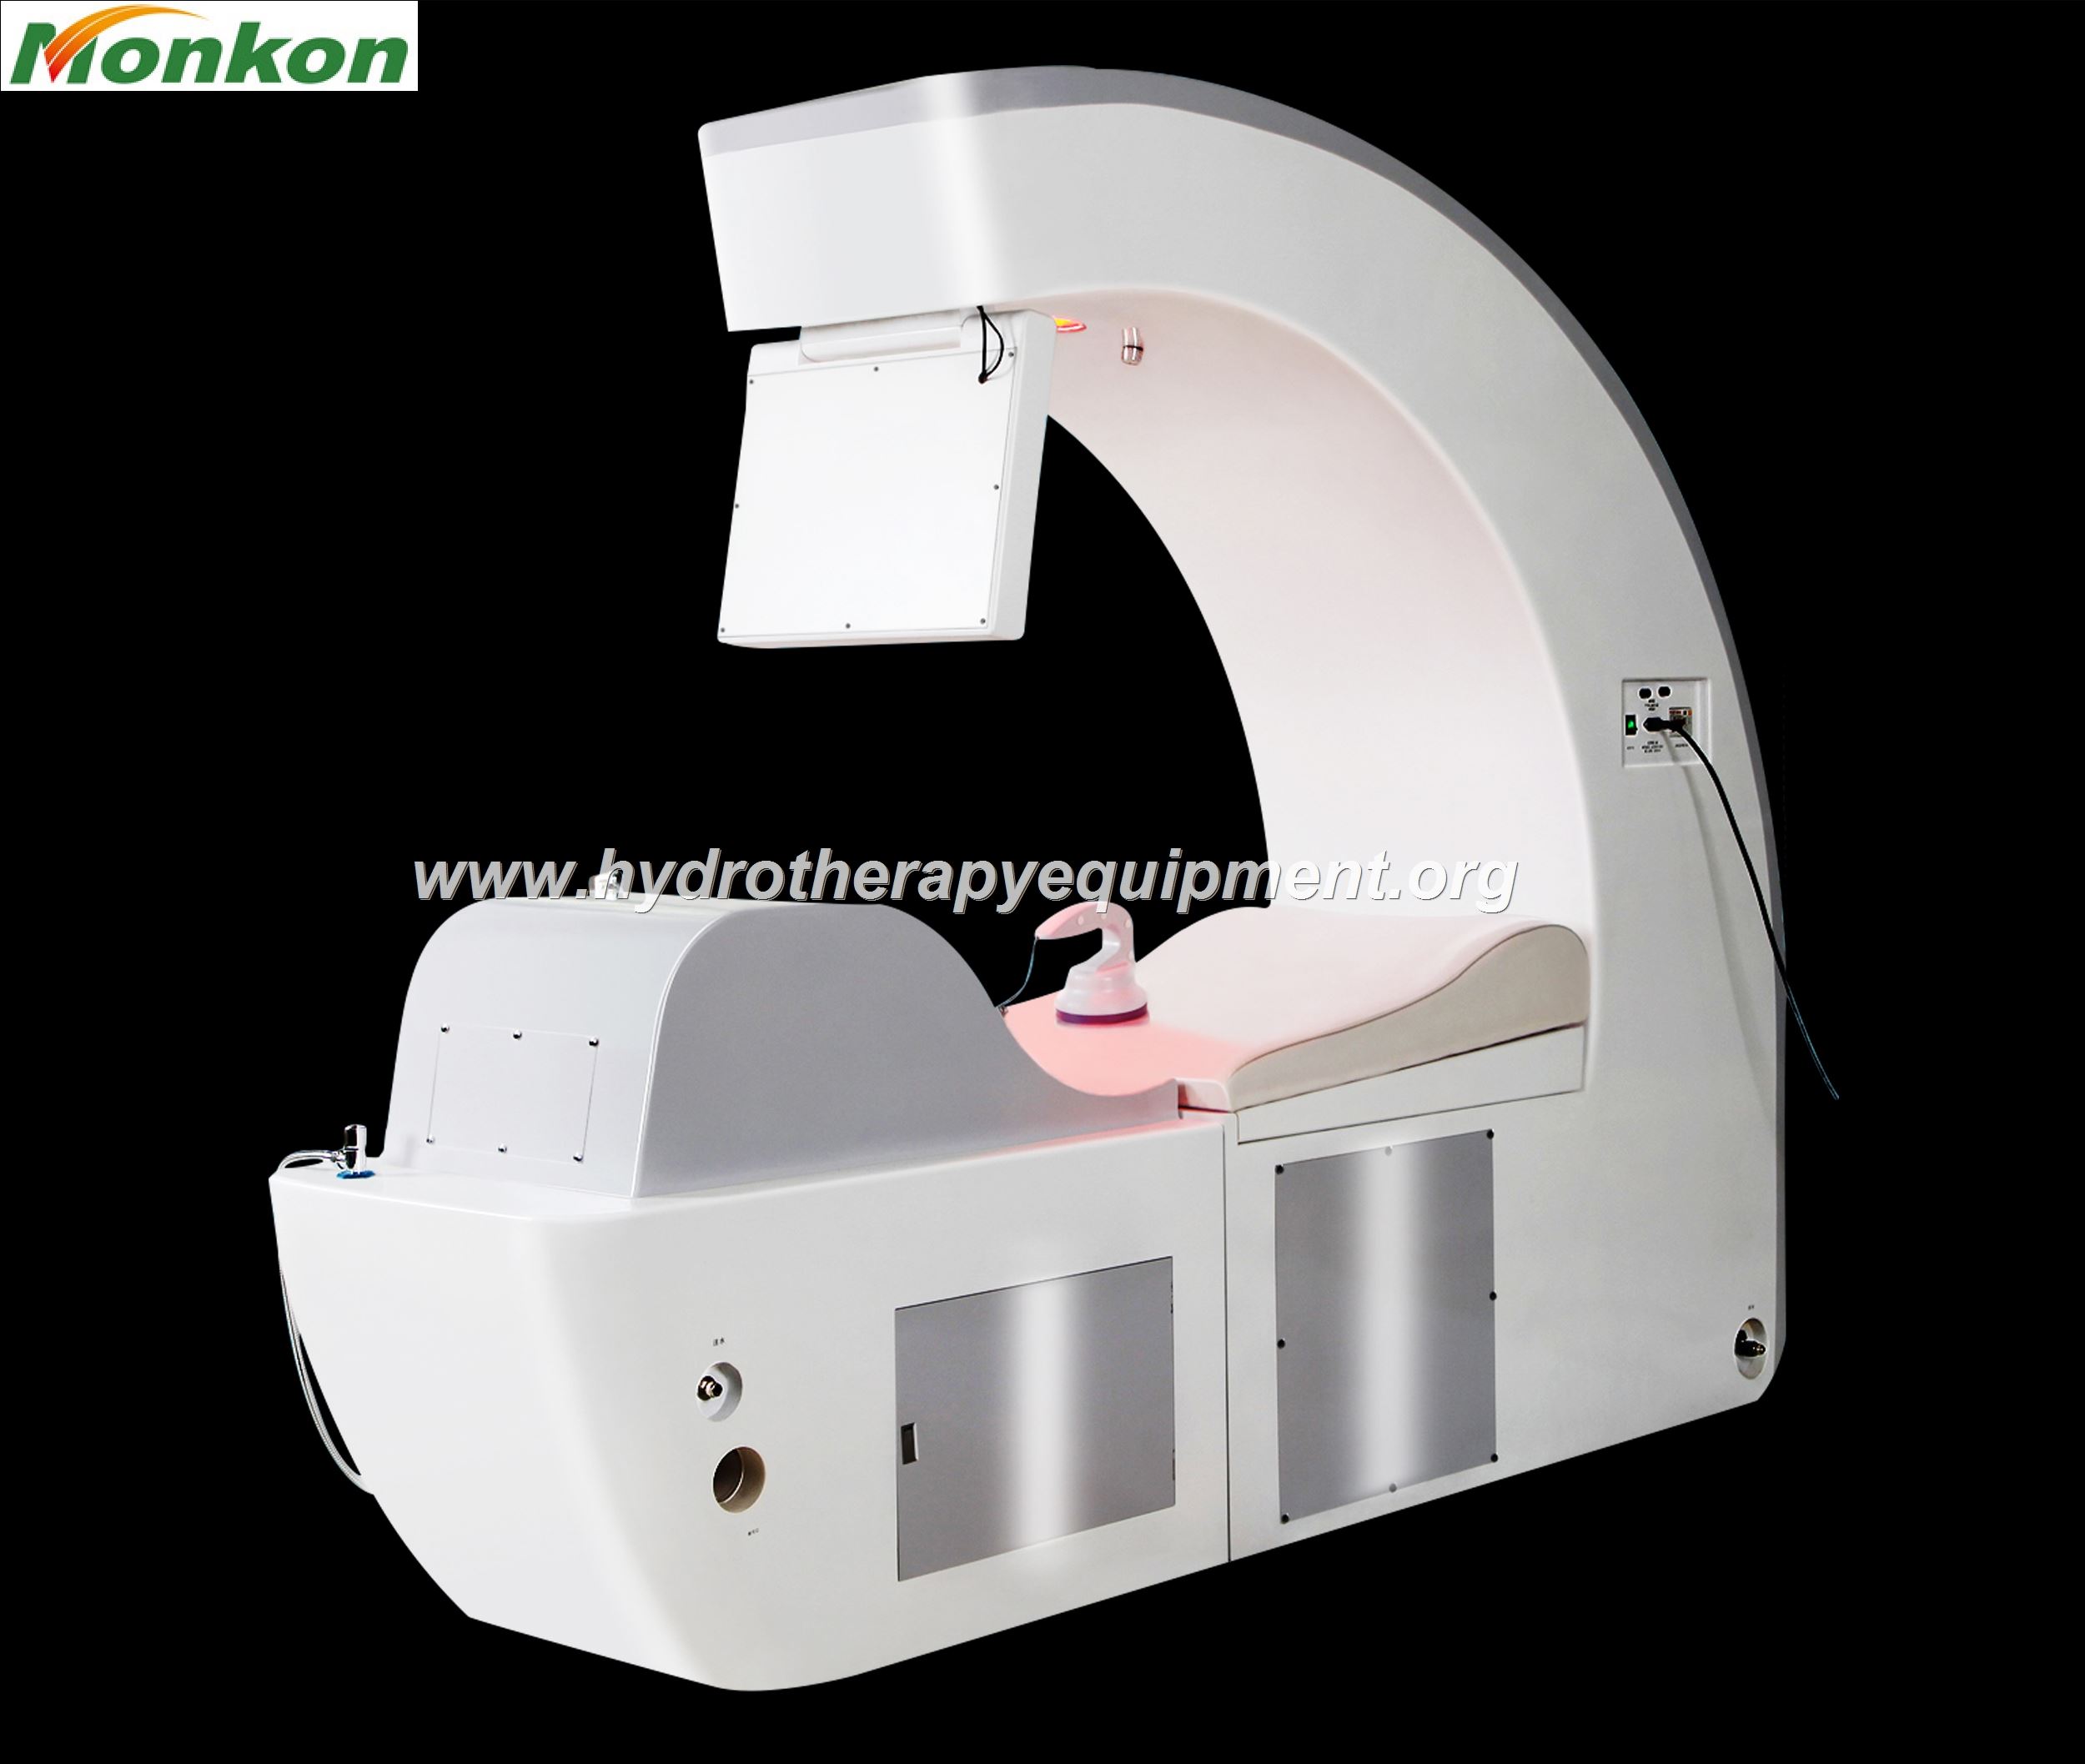 colon hydrotherapy equipment in india